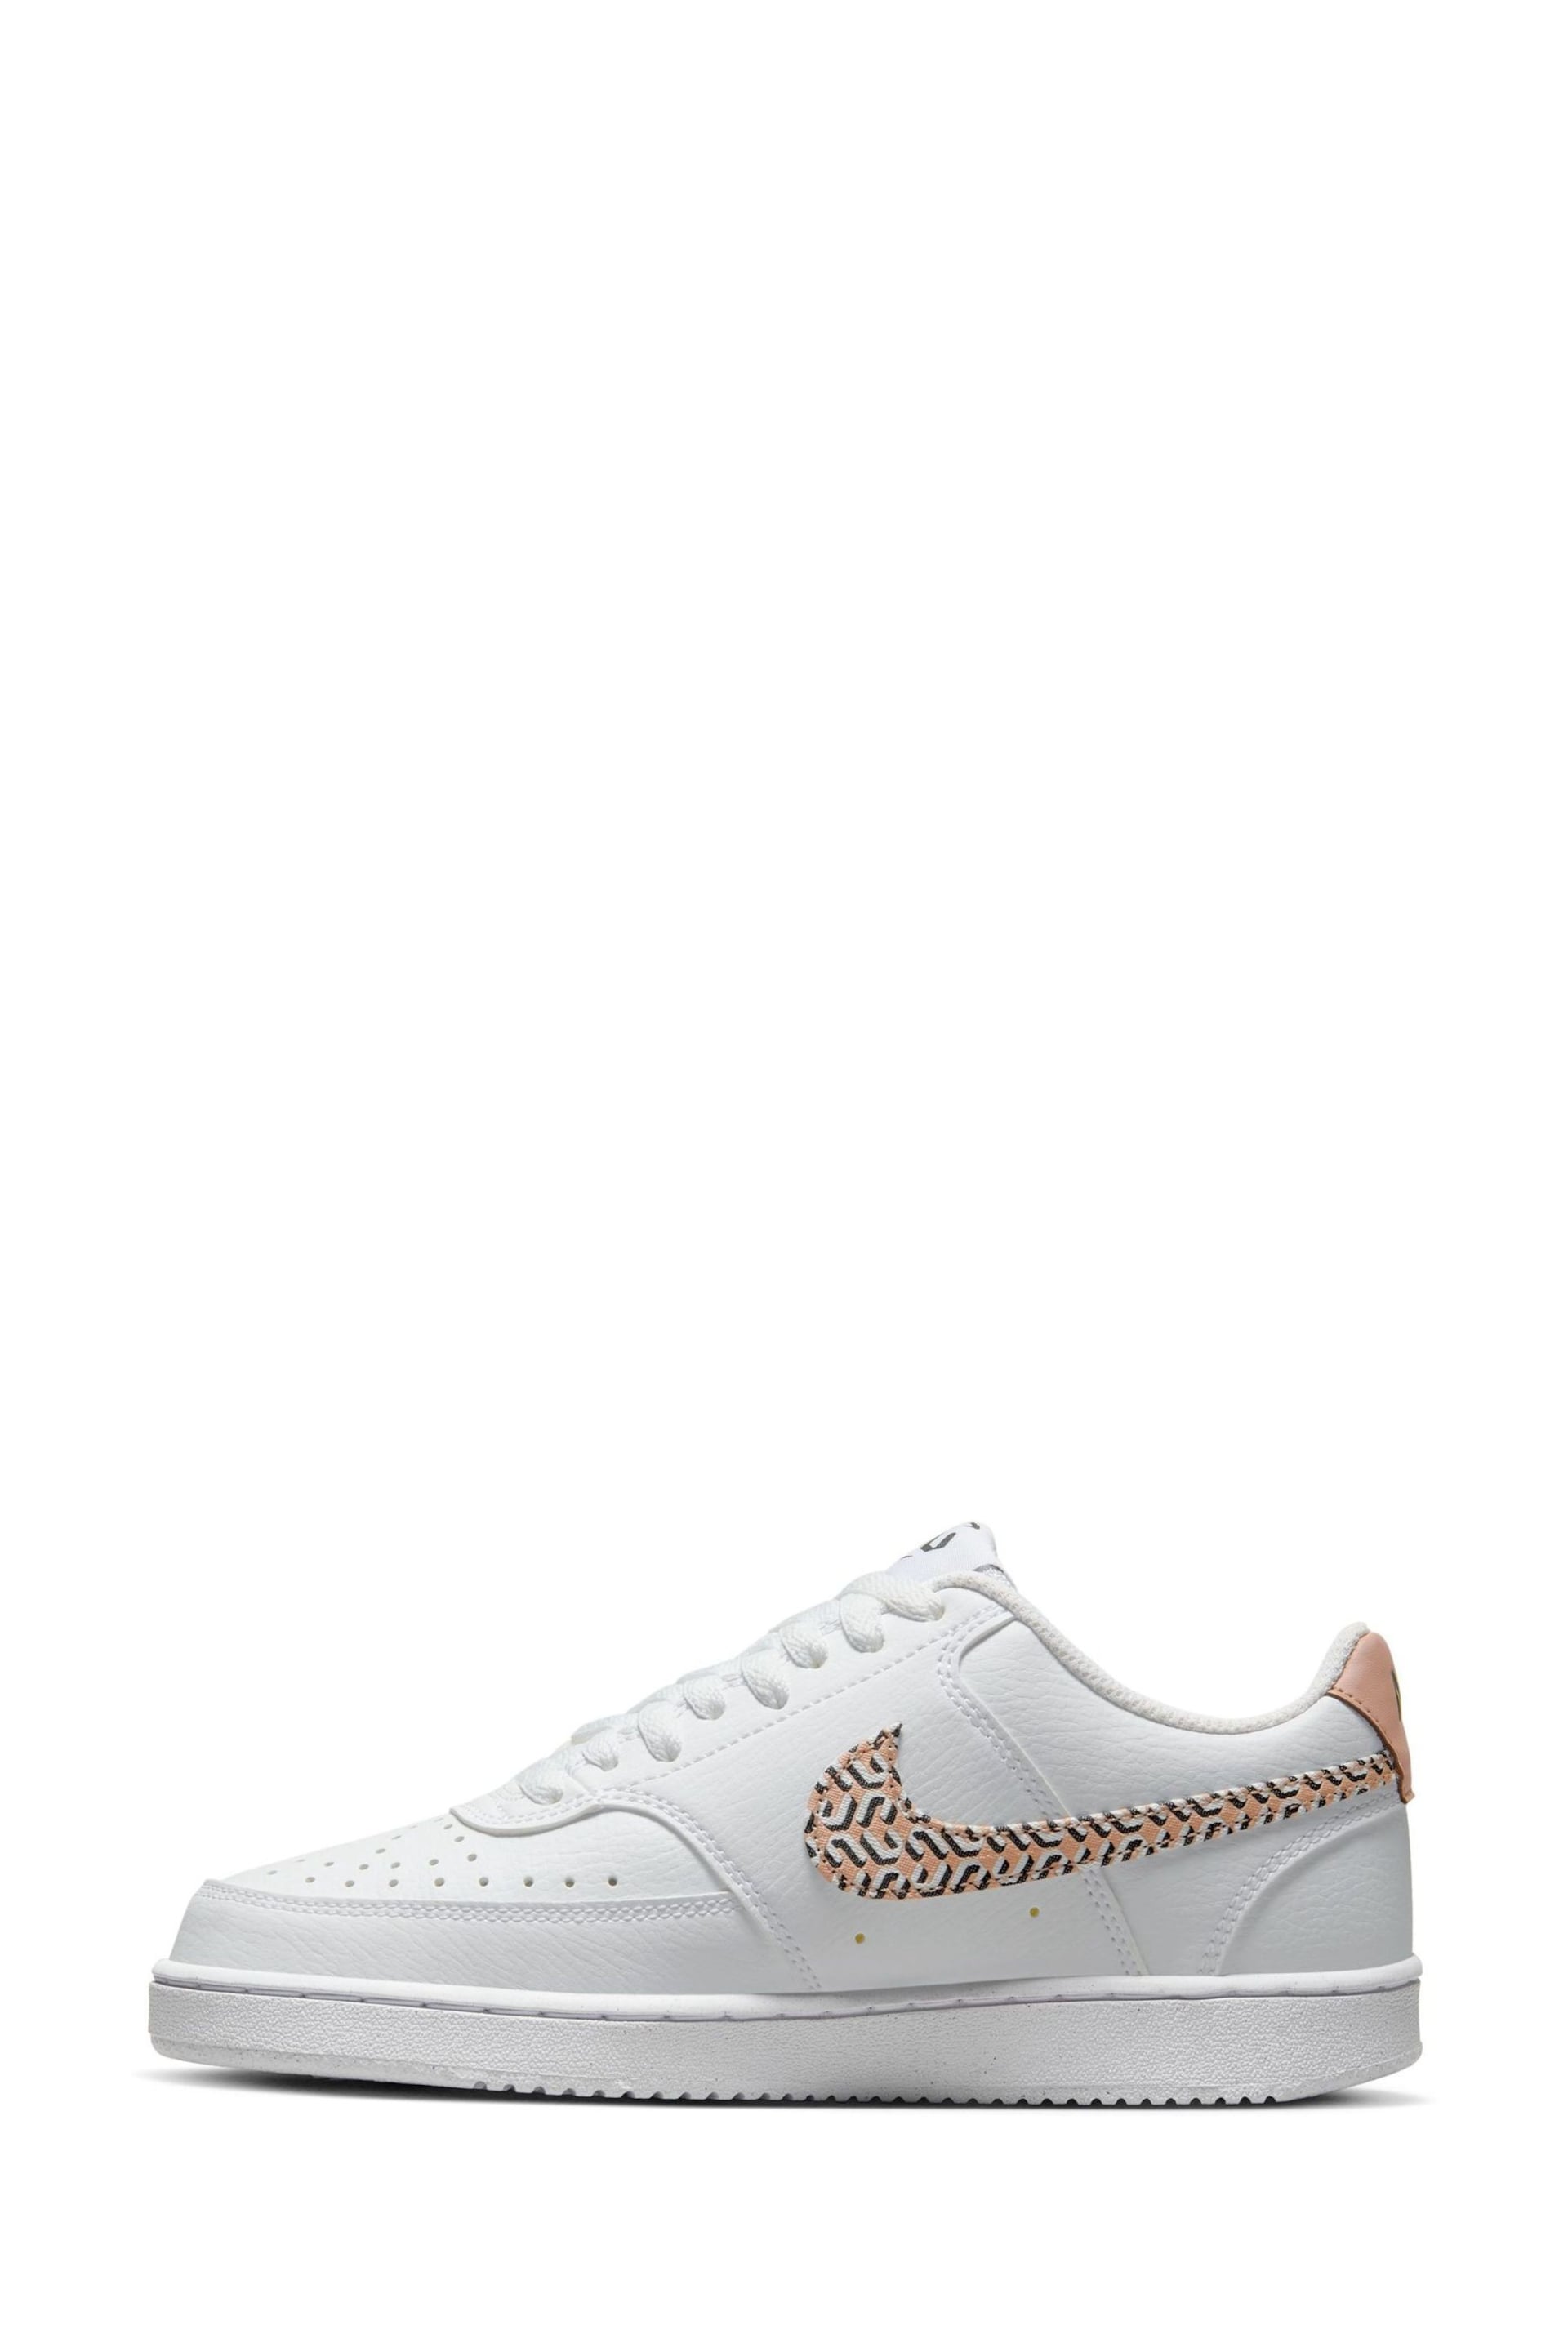 Nike White Court Vision Low Trainers United in Victory - Image 4 of 12